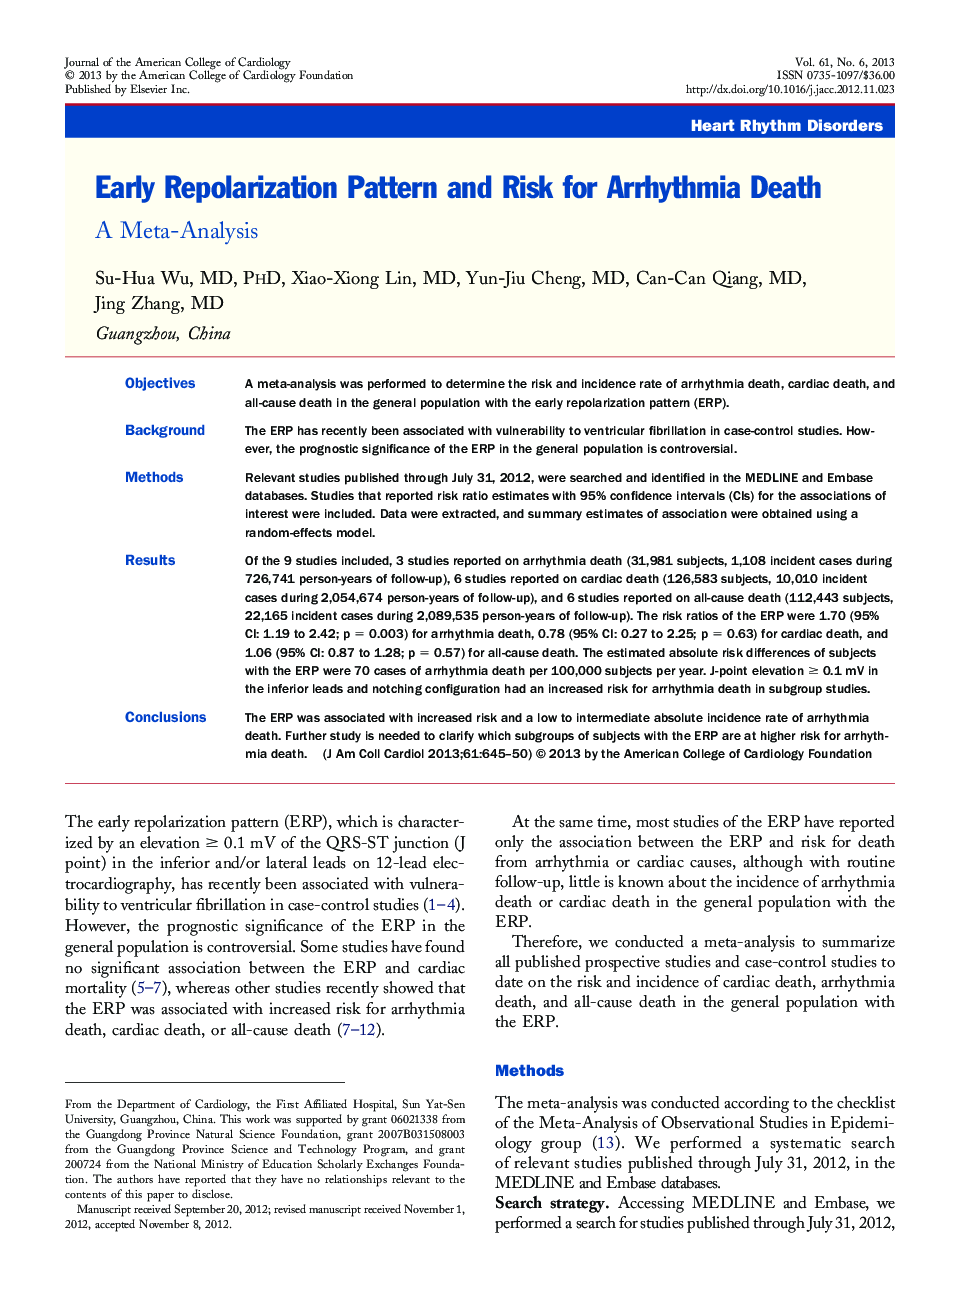 Early Repolarization Pattern and Risk for Arrhythmia Death : A Meta-Analysis